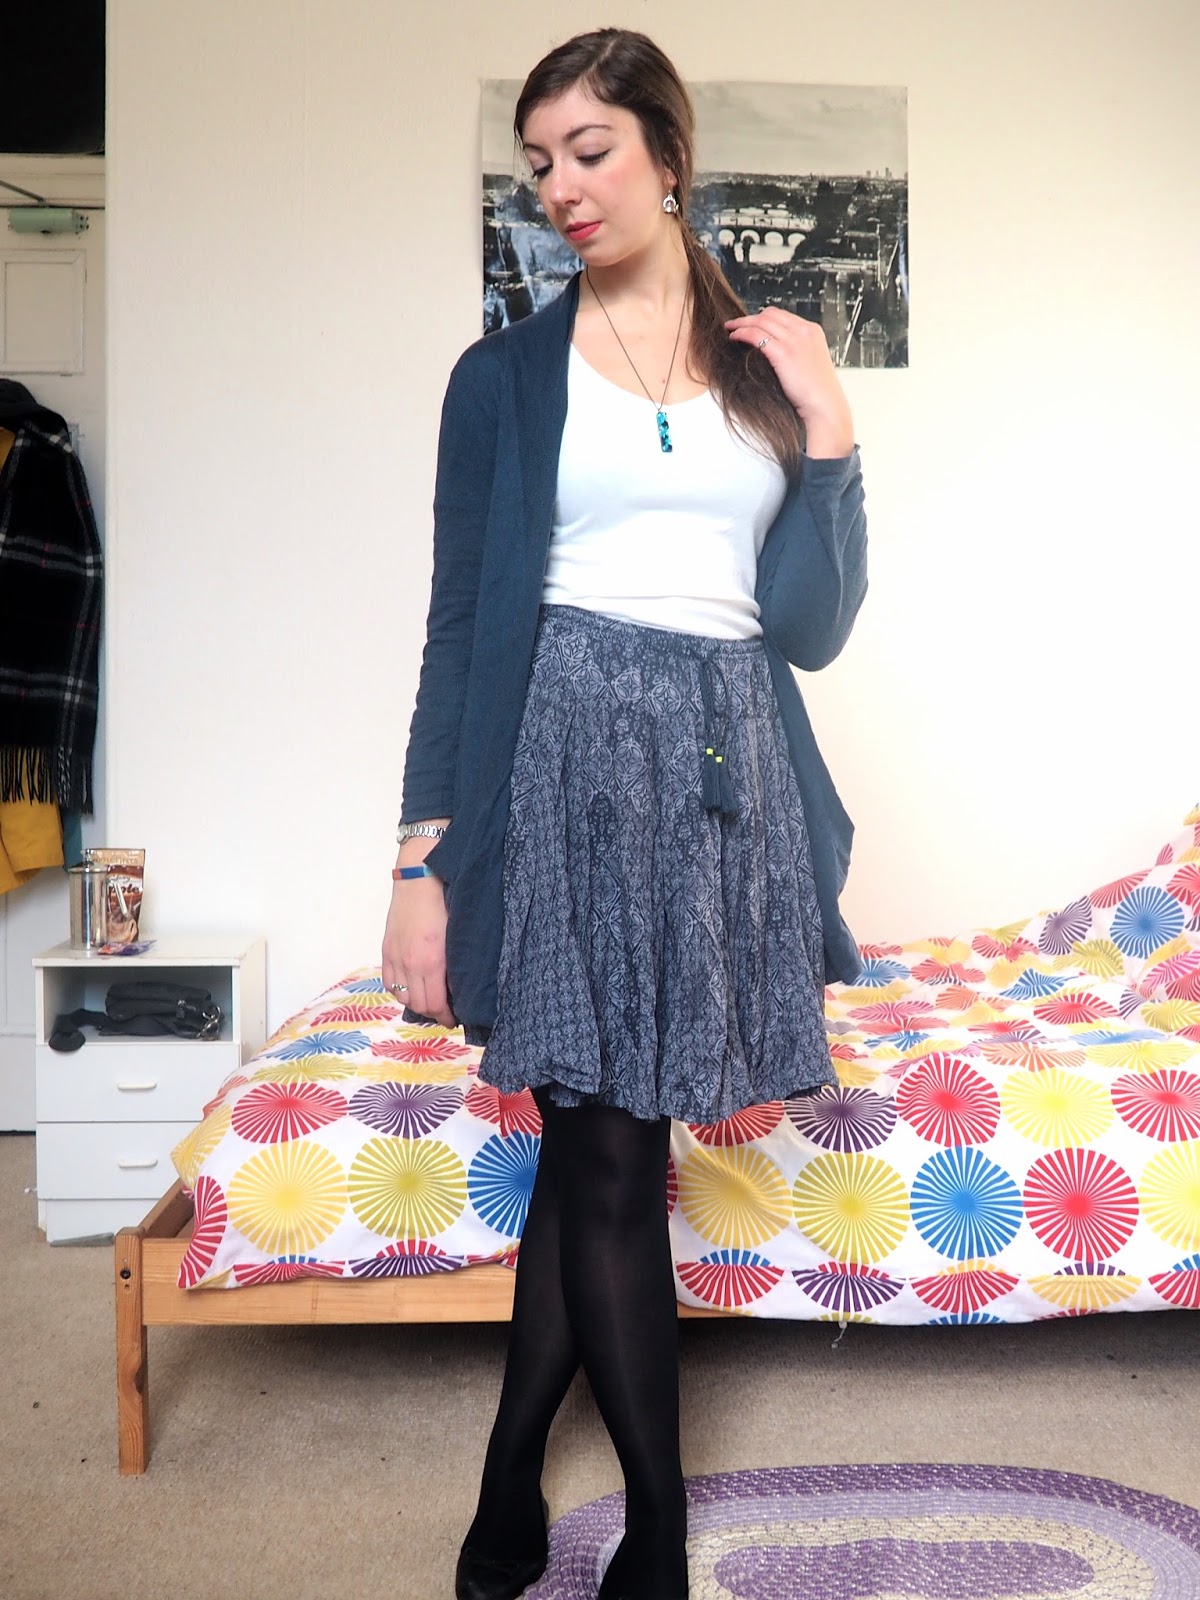 Winter tights style outfit - be our guest - Fashionmylegs : The tights ...